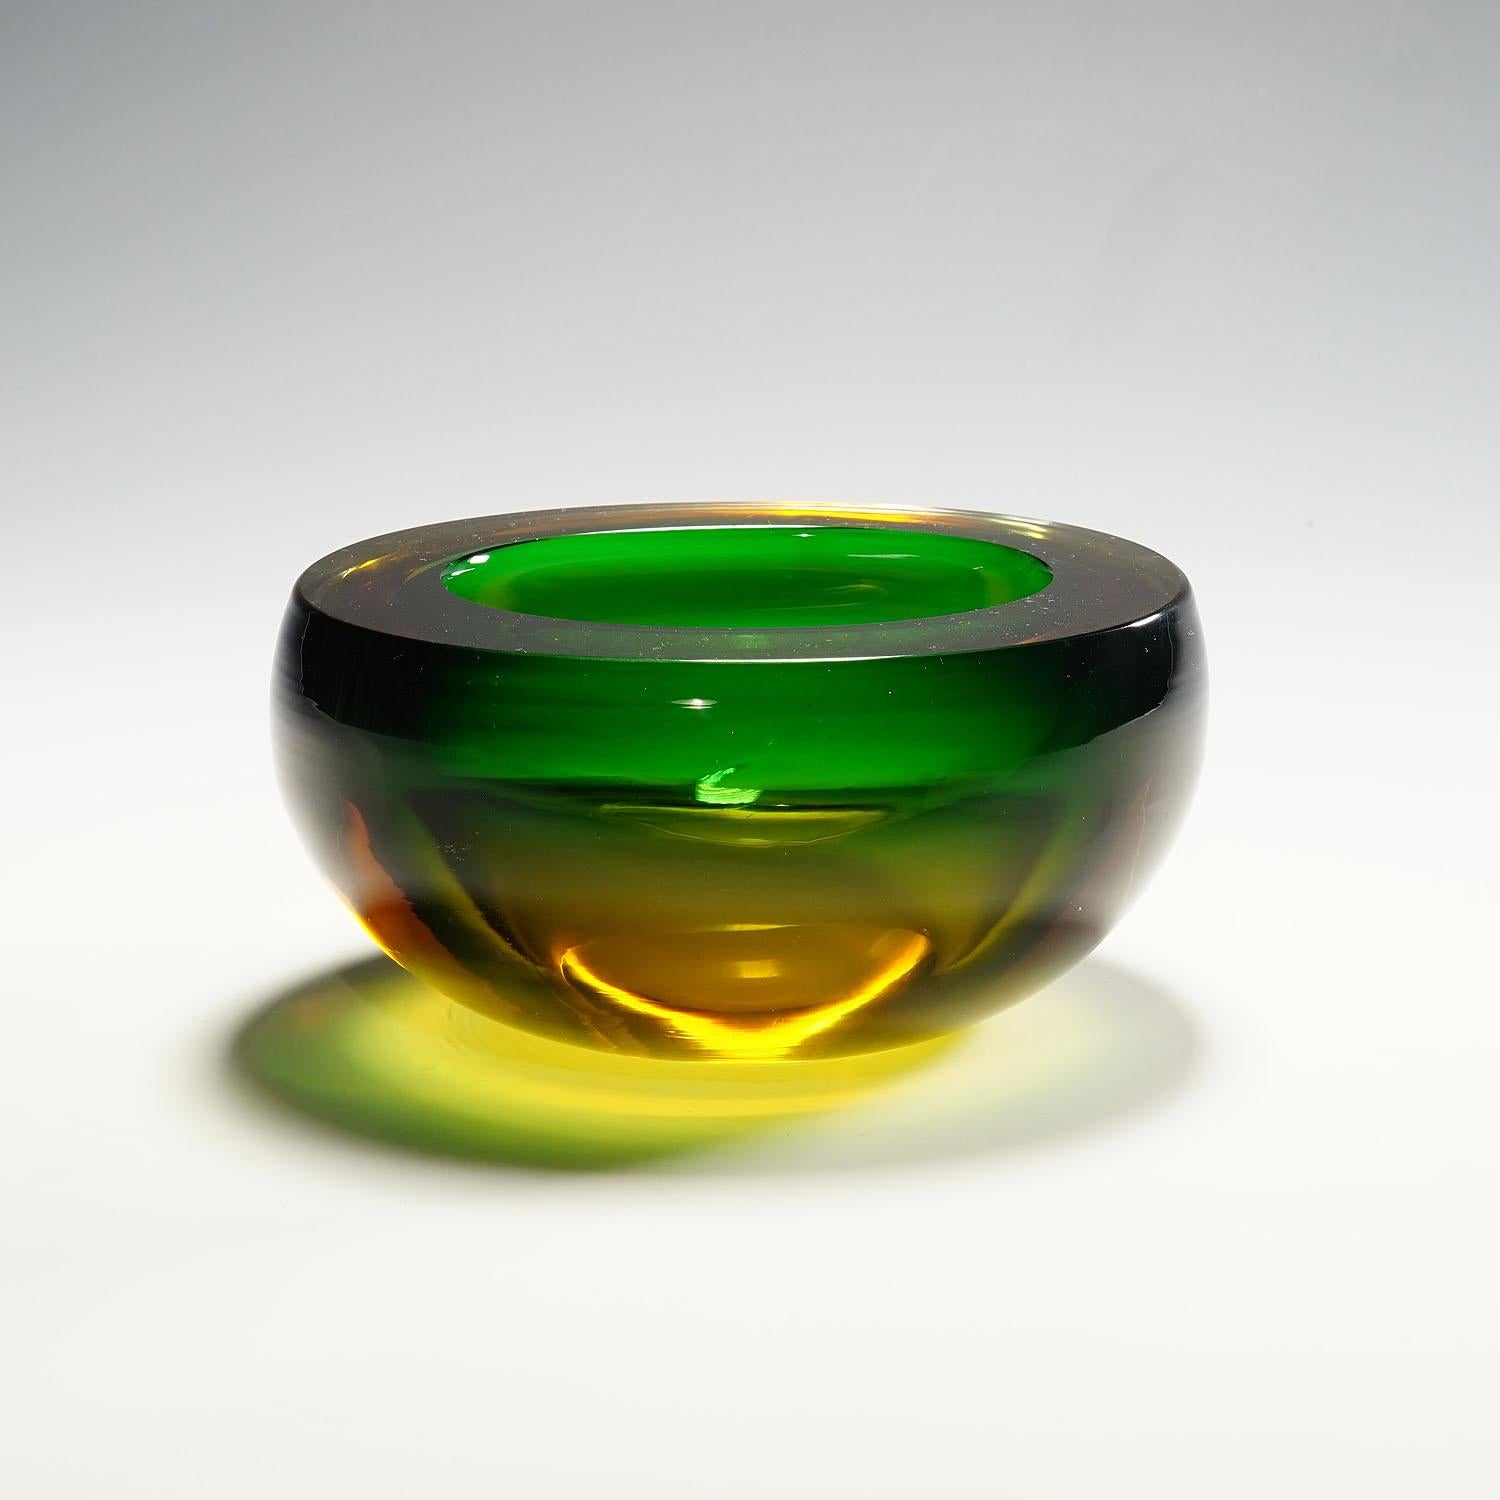 Italian Midcentury Modern Murano Green and Amber Sommerso Art Glass Bowl 1960s For Sale